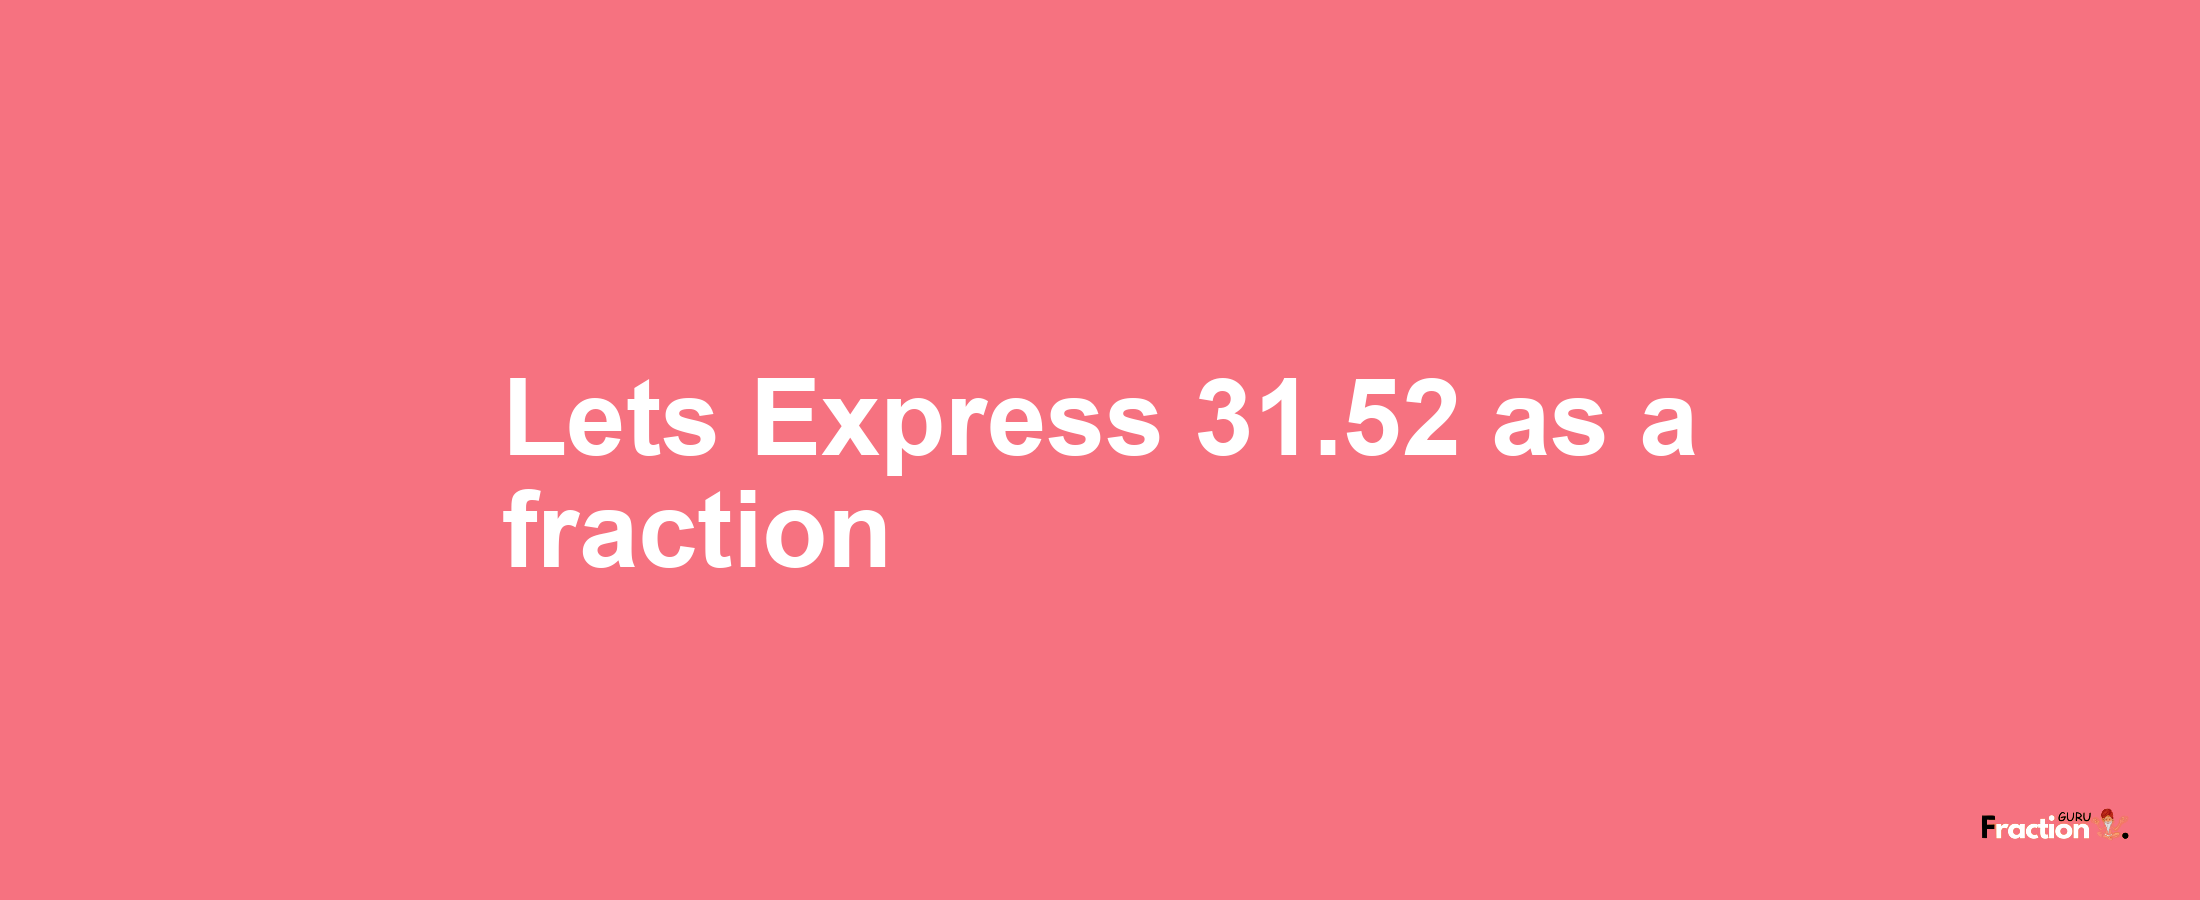 Lets Express 31.52 as afraction